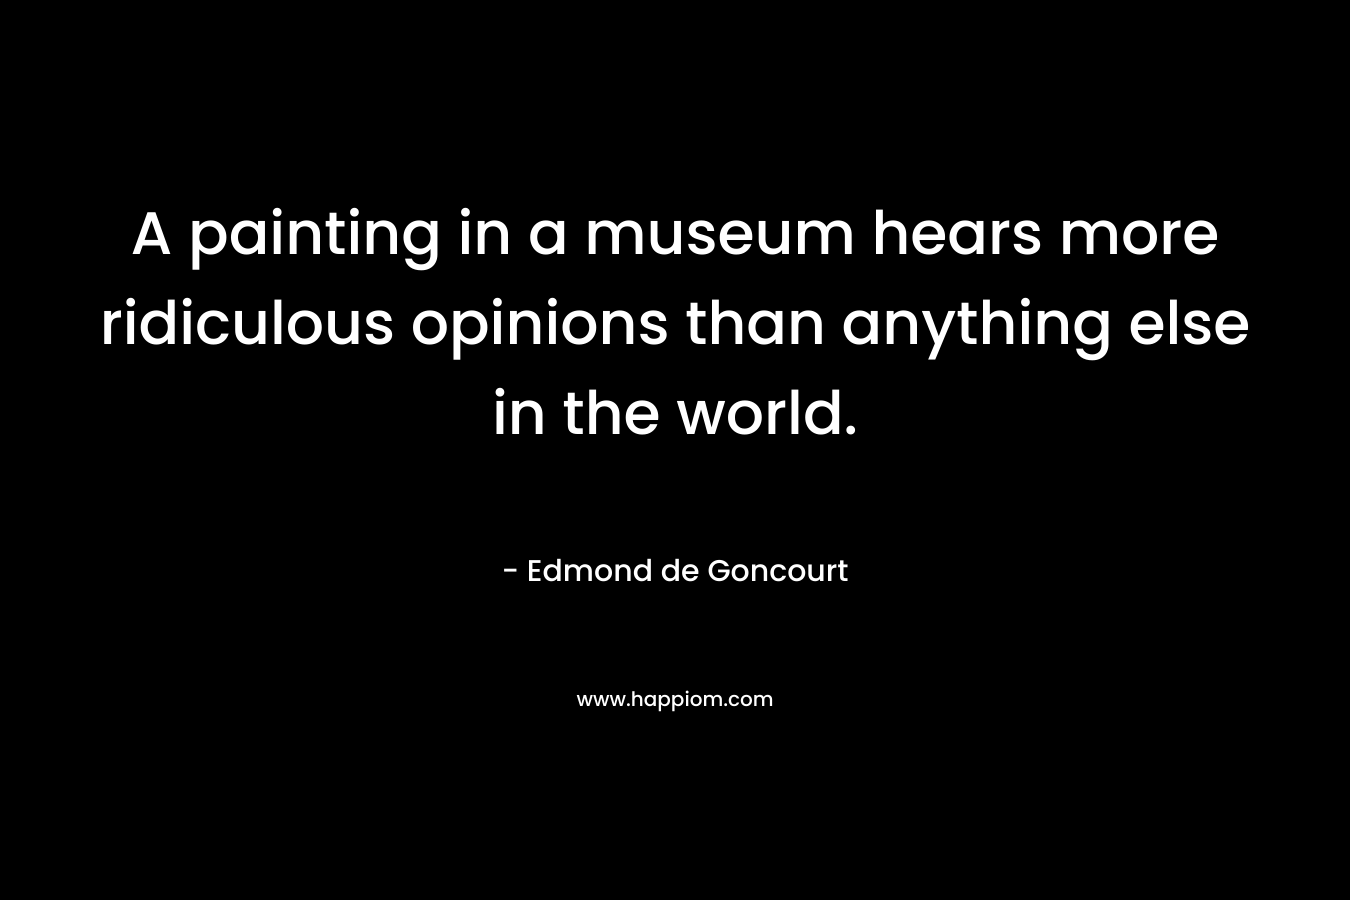 A painting in a museum hears more ridiculous opinions than anything else in the world. – Edmond de Goncourt